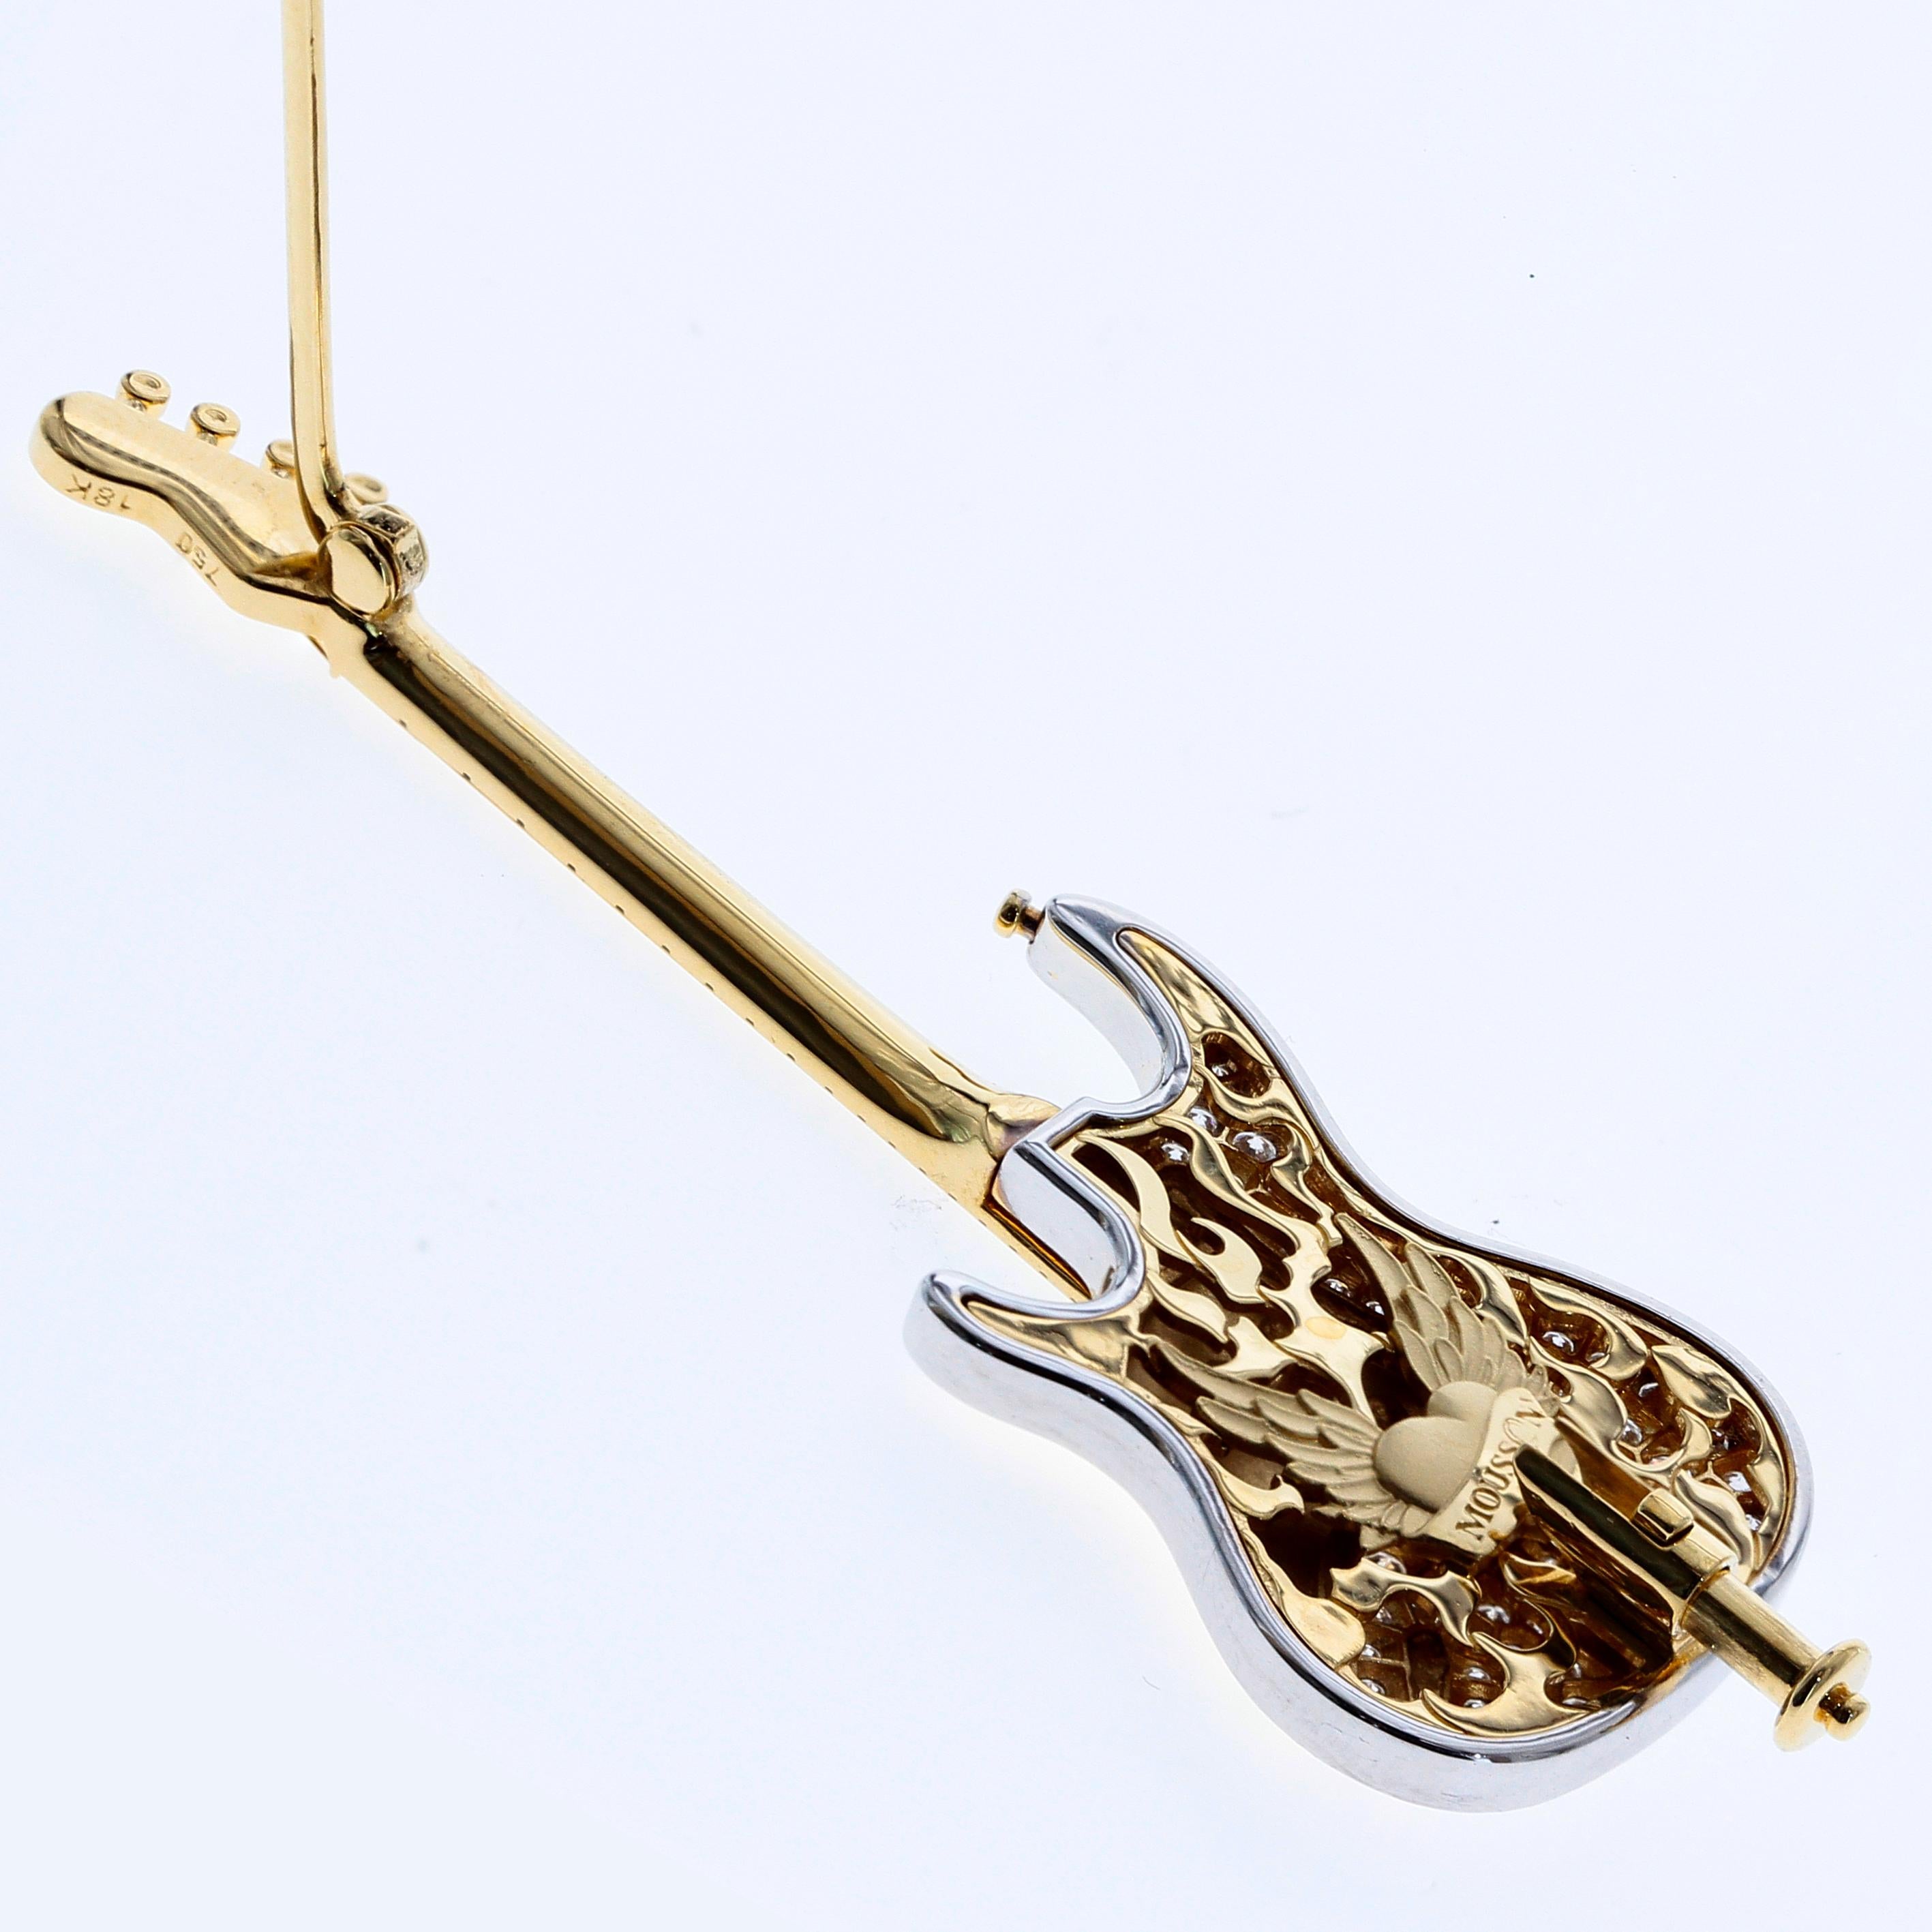 Mousson Atelier represent with prouds!
18 Karat Gold Guitar Brooch. Body with Diamonds, all gold strings are highly detailed and carefully tighten by our craftsmen. On the back side You can find rock-n-roll heart in flames.

59mm x 19mm x